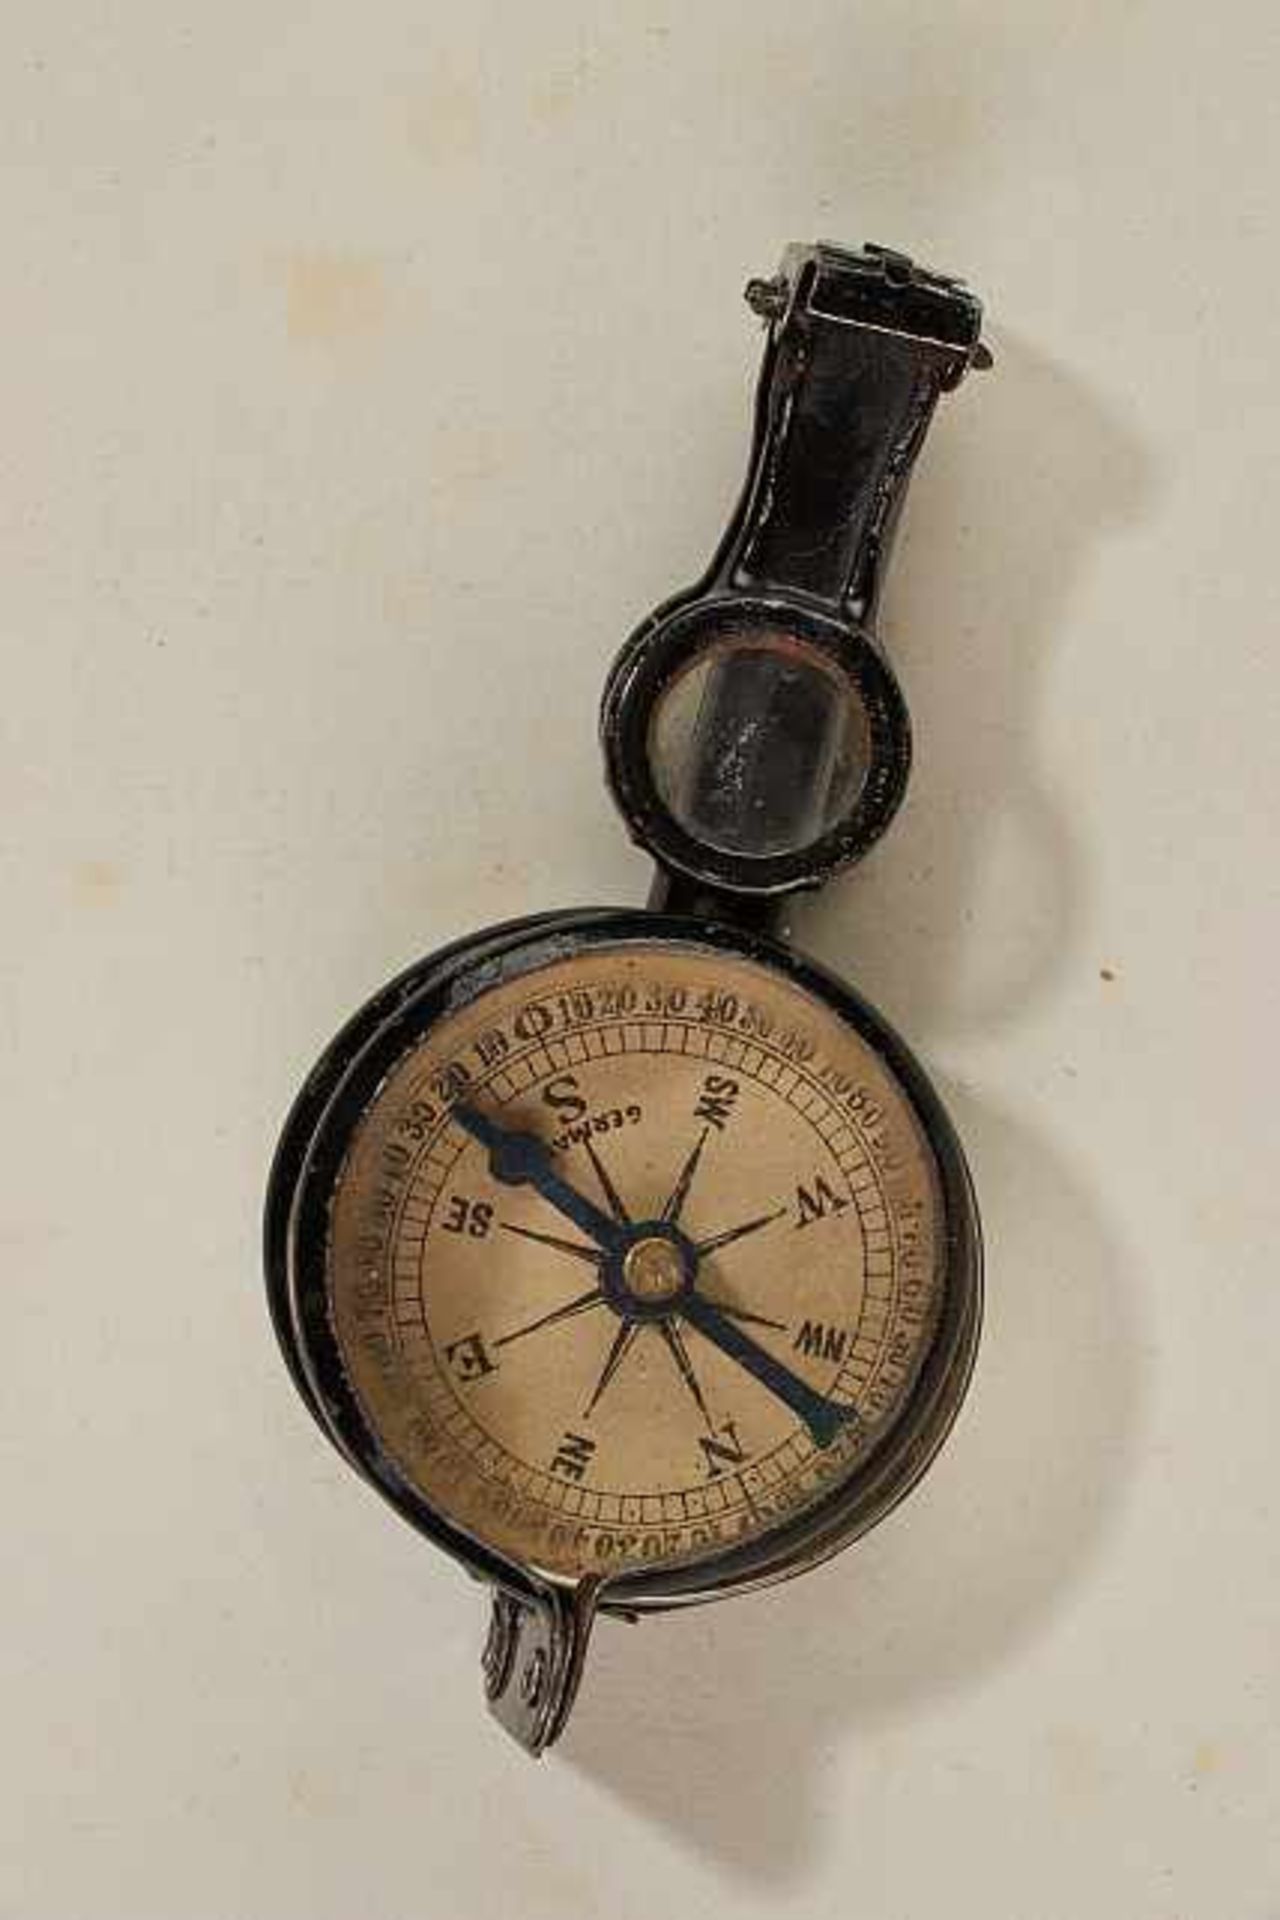 Deutsches Reich 1933 - 1945 - Heer : Army Issue March Compass.Army issue compass shows light wear/